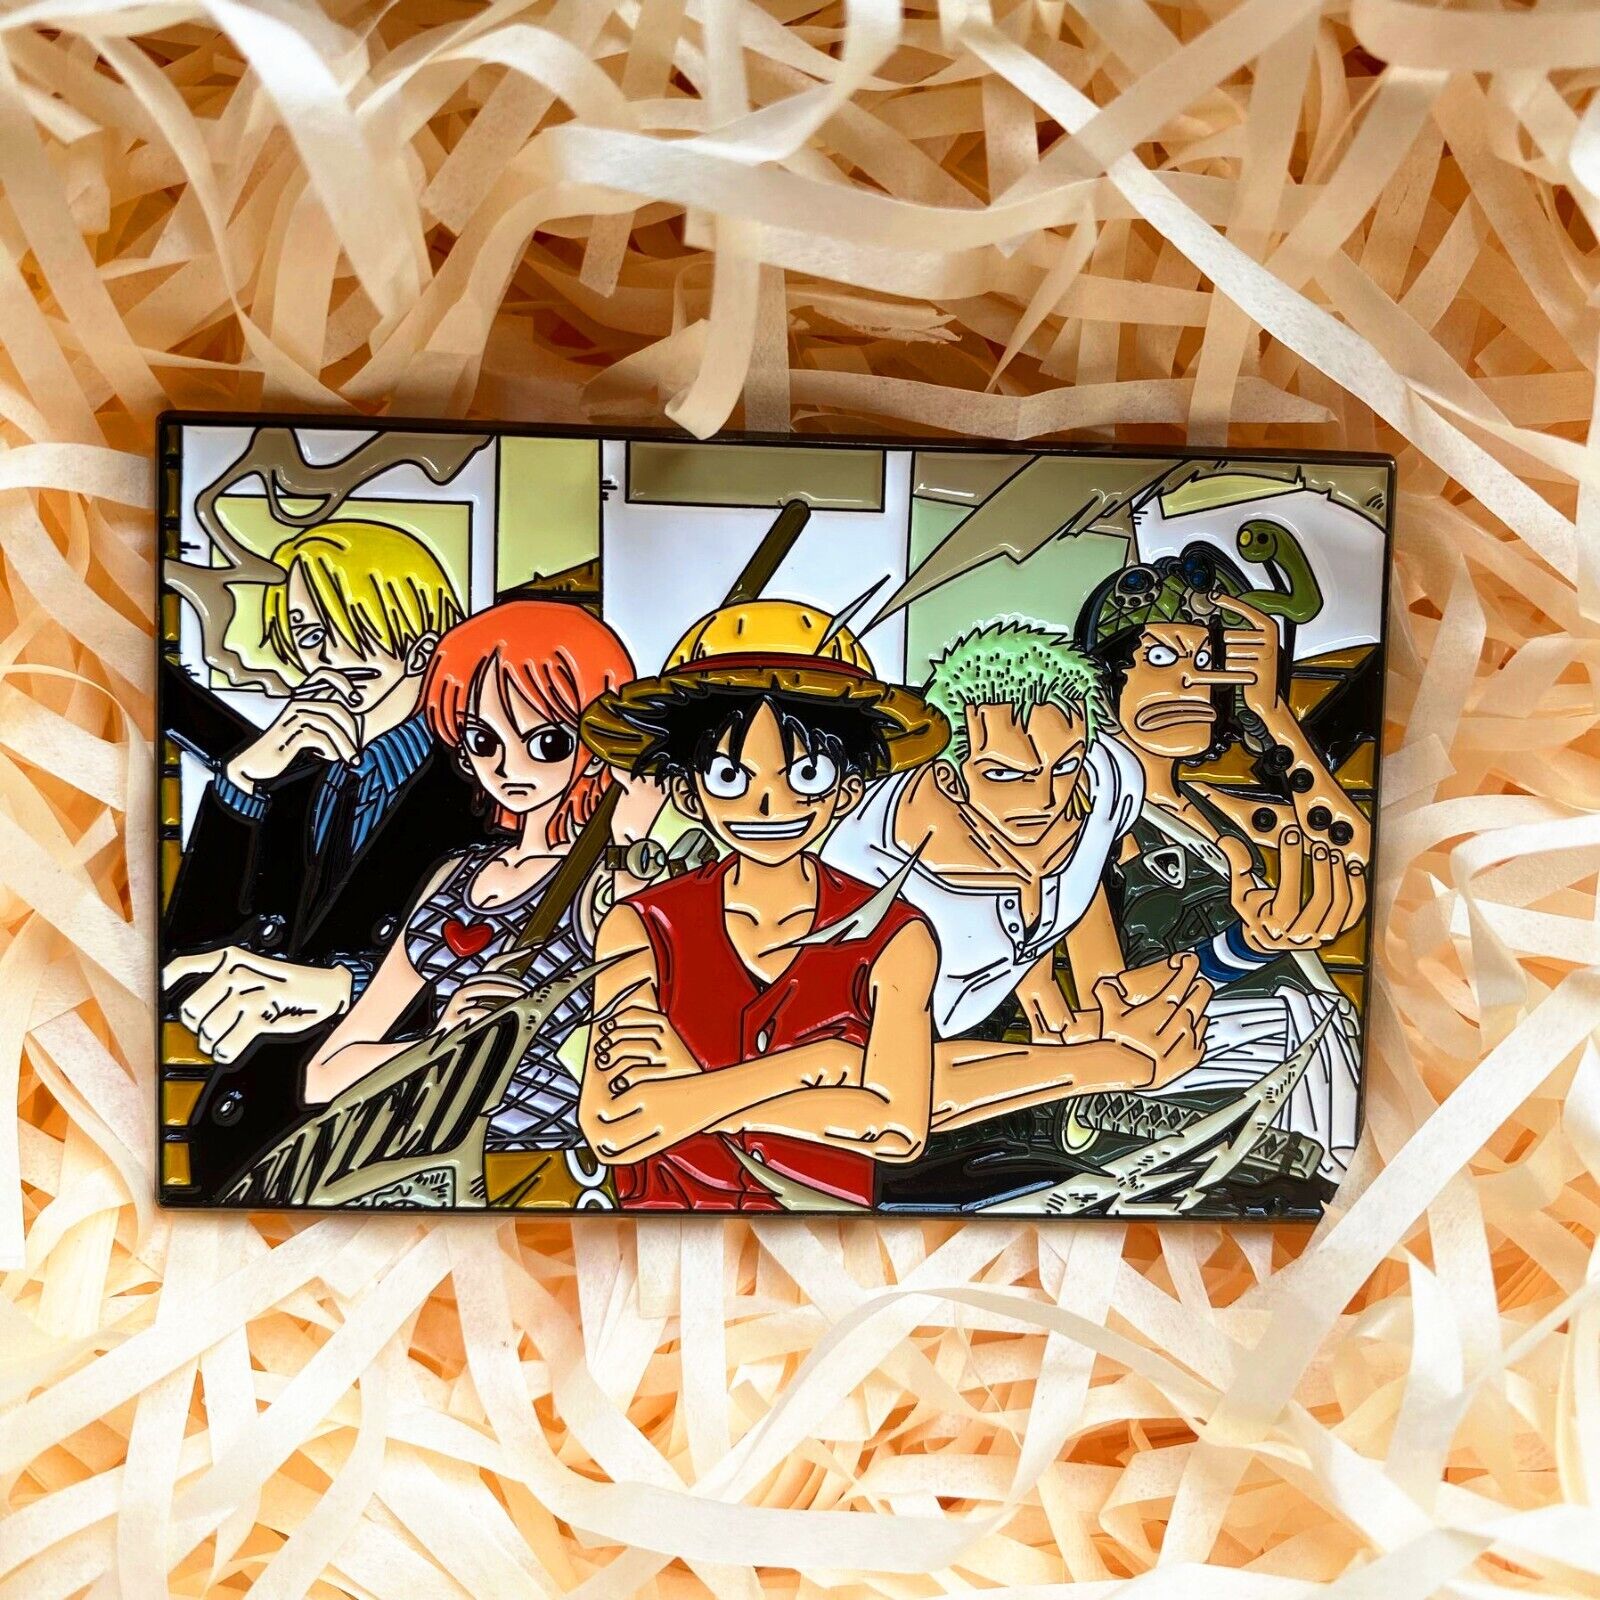 1PC Anime One Piece Luffy Zoro Nami Metal Badge Pin Brooch Collection Gift